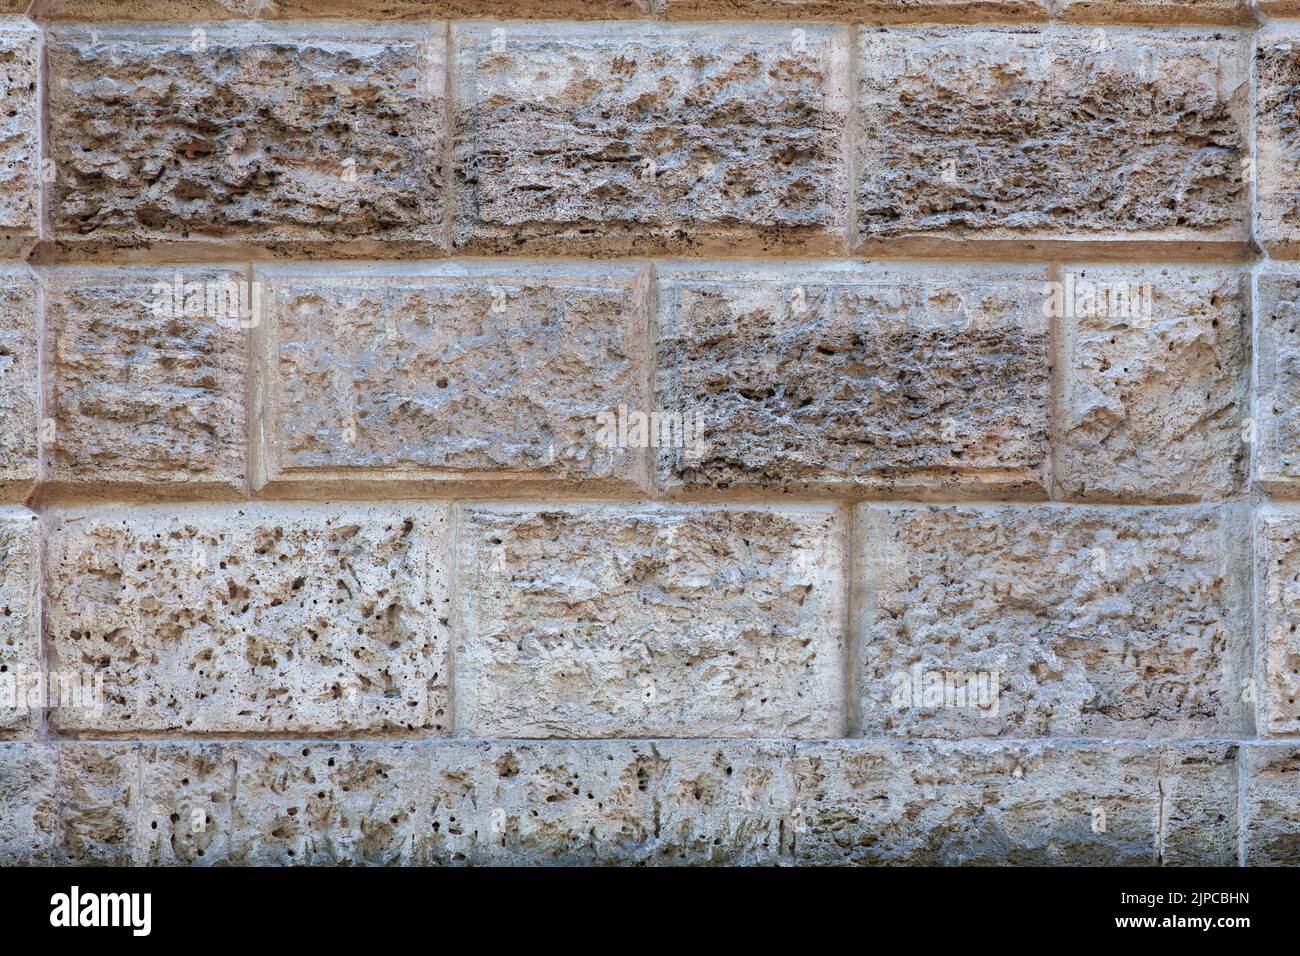 Background image - a fragment of the wall of an ancient building made of volcanic rocks. Stock Photo